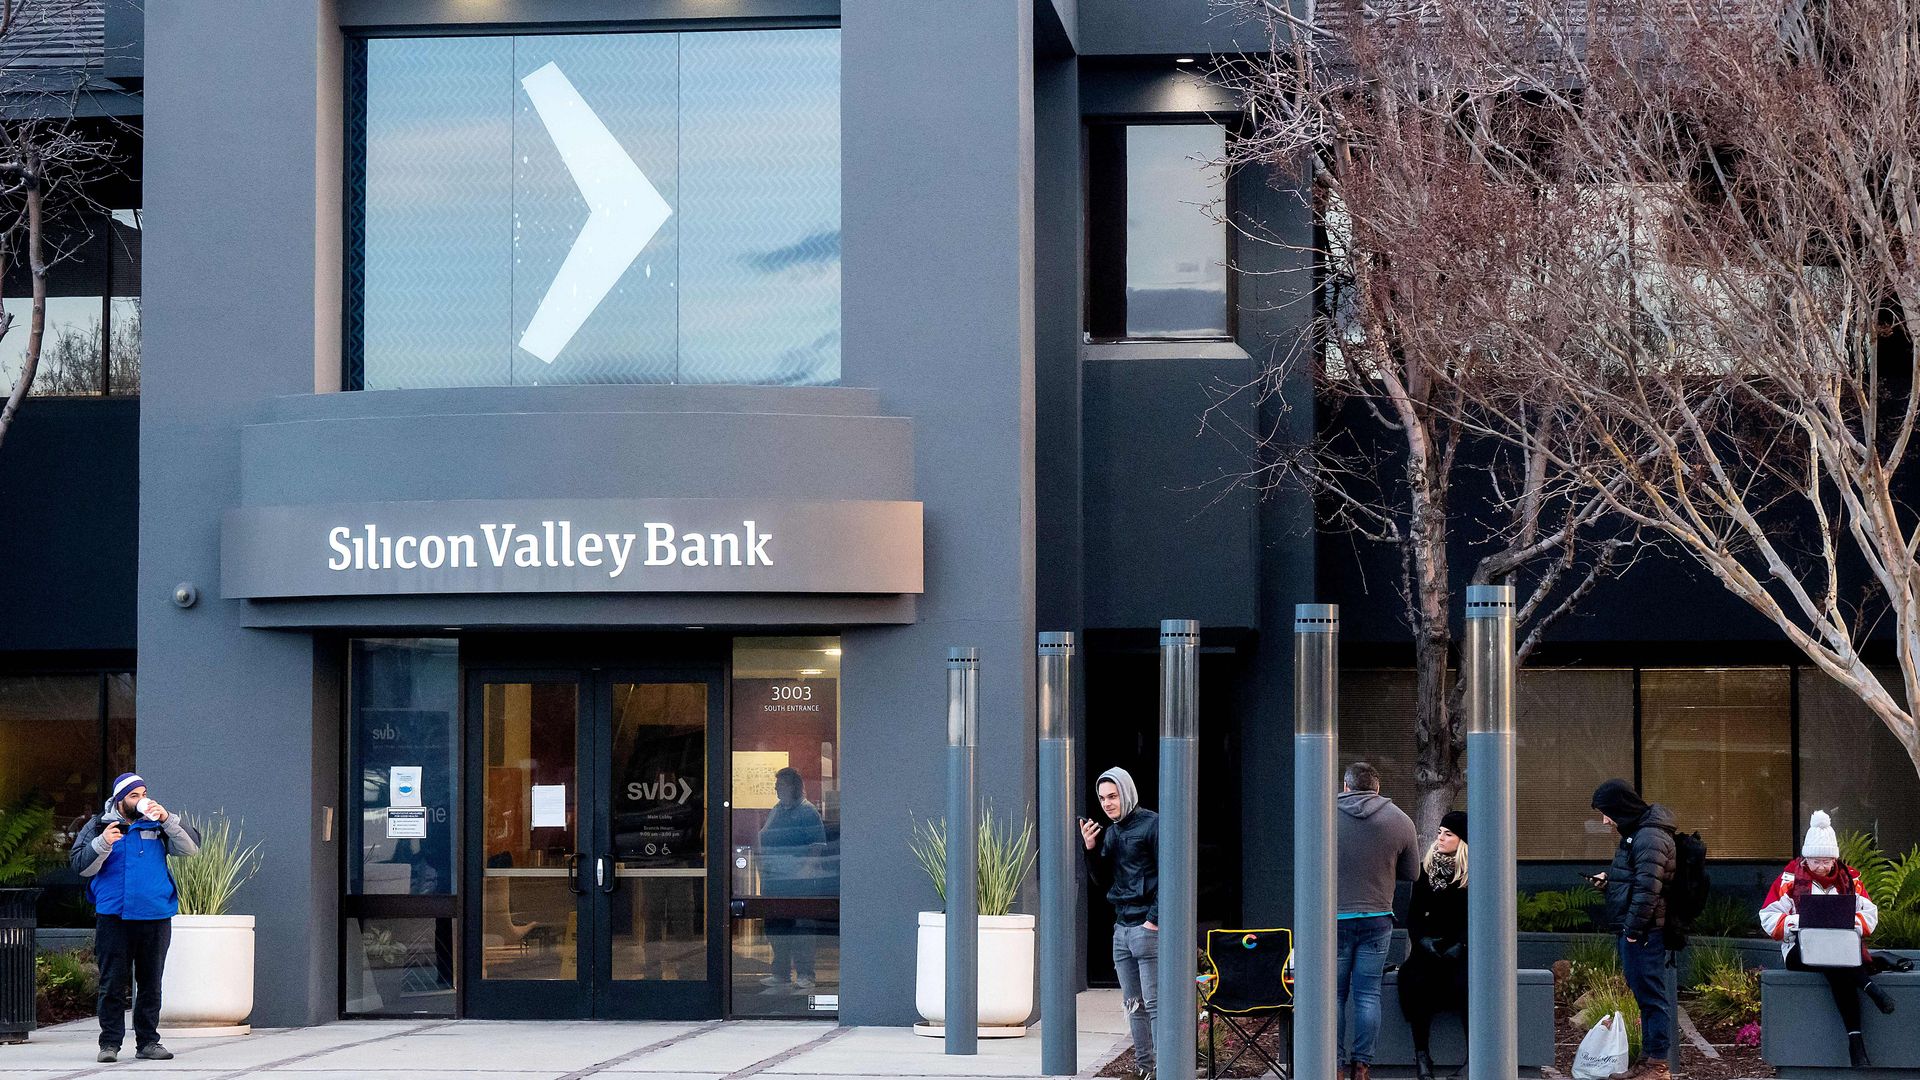 Silicon Valley Bank customers line up before the opening of a branch at SVBs headquarters in Santa Clara, California, on March 13, 2023